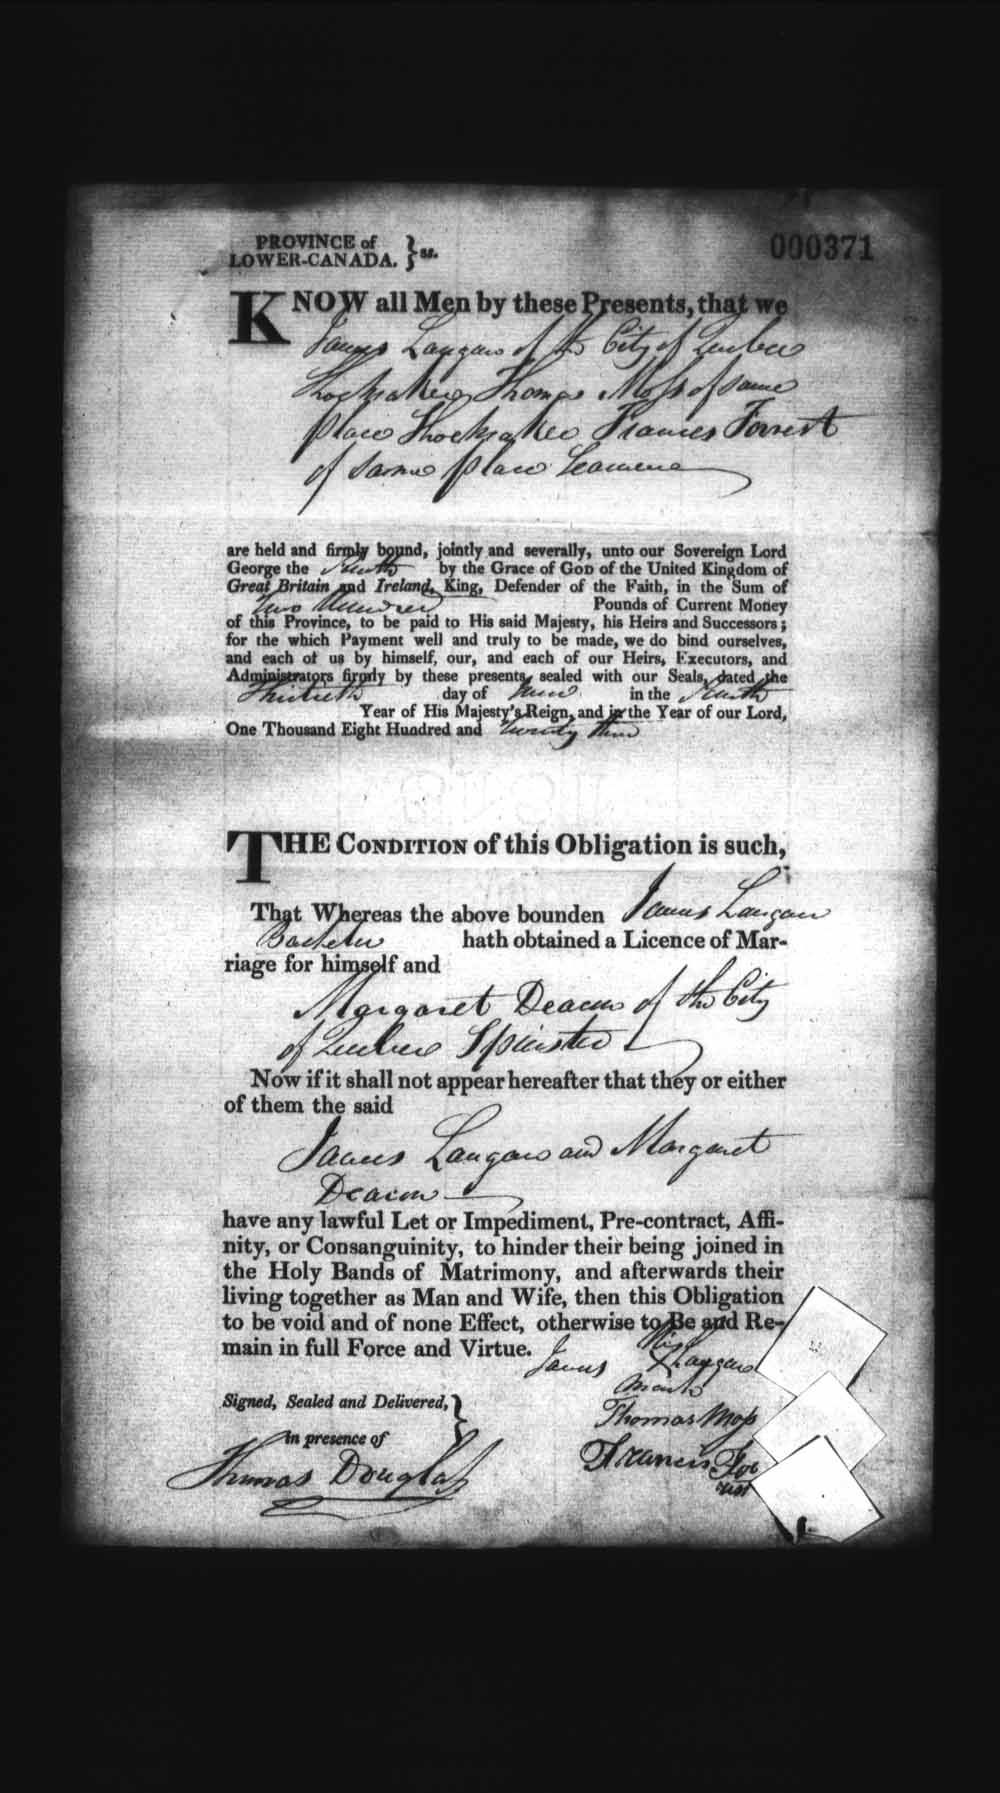 Digitized page of Upper and Lower Canada Marriage Bonds (1779-1865) for Image No.: e008236261